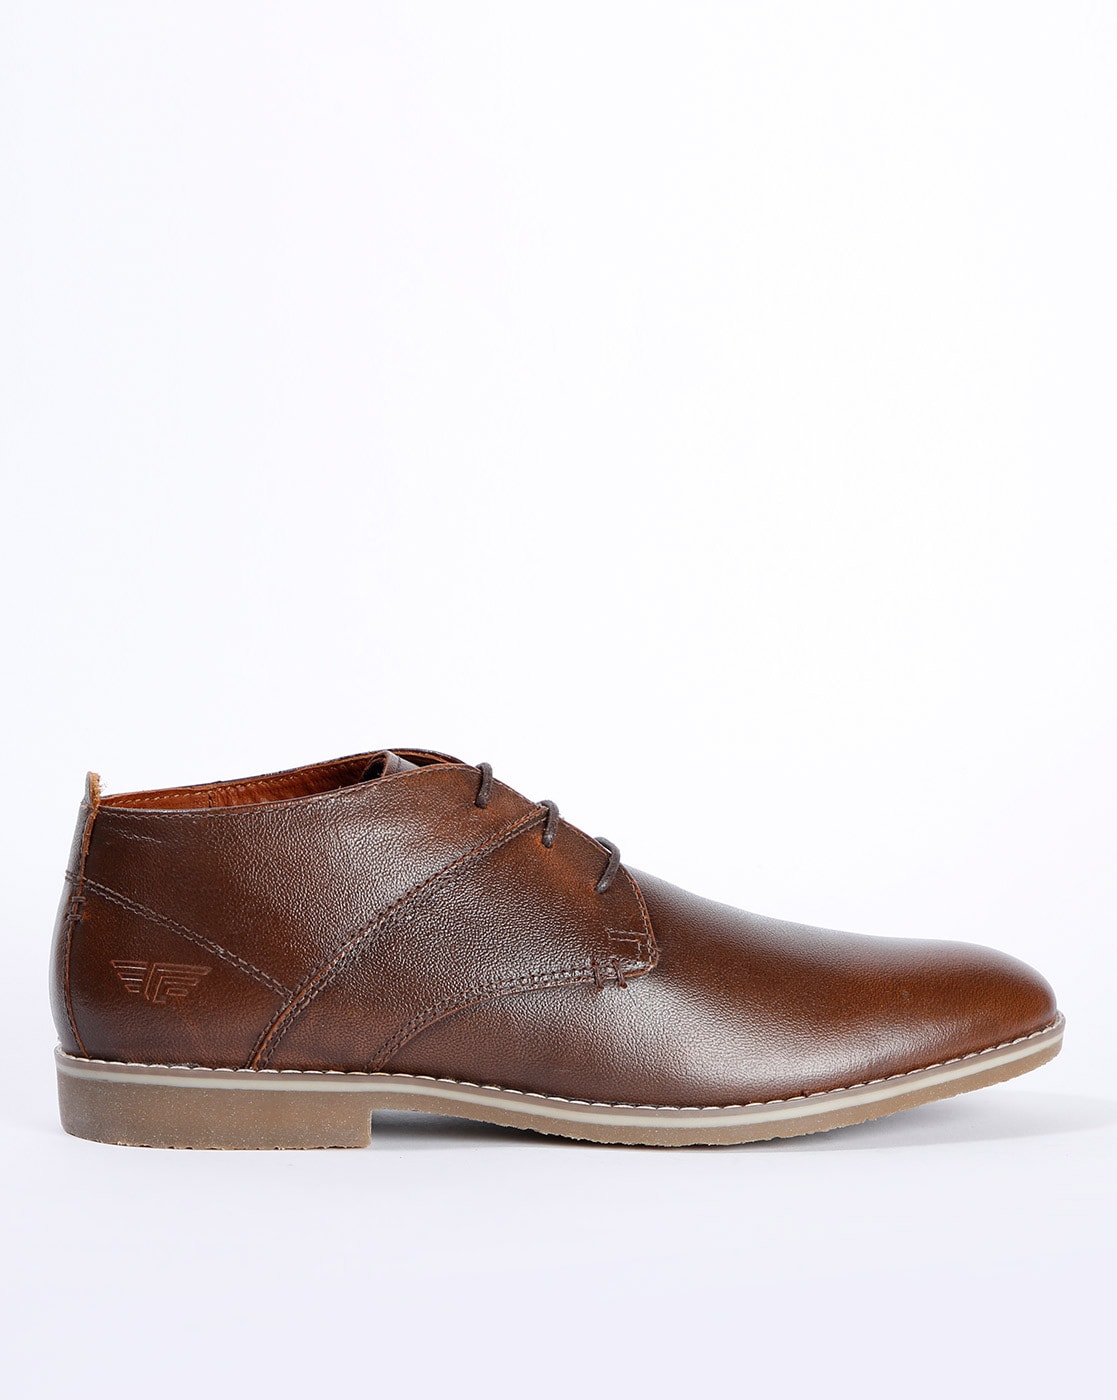 red tape tan casual shoes